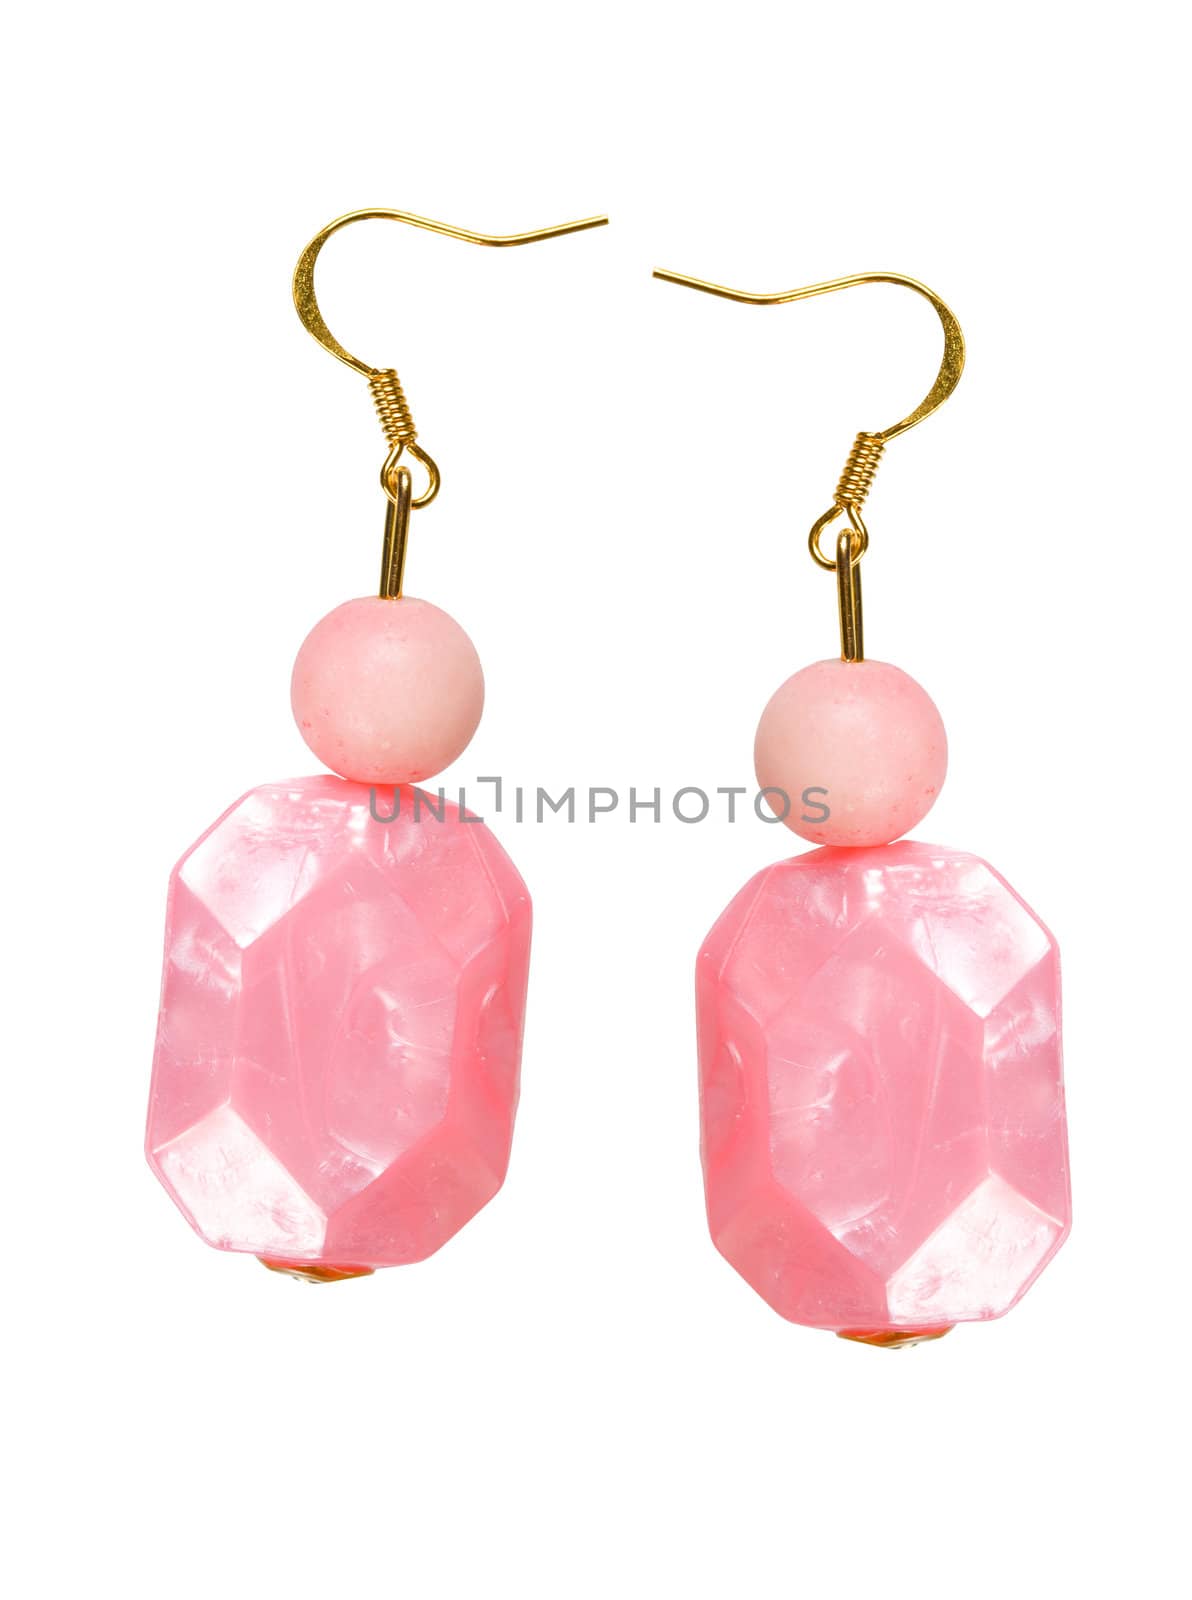 Earrings made of pink plastic on a white background. collage